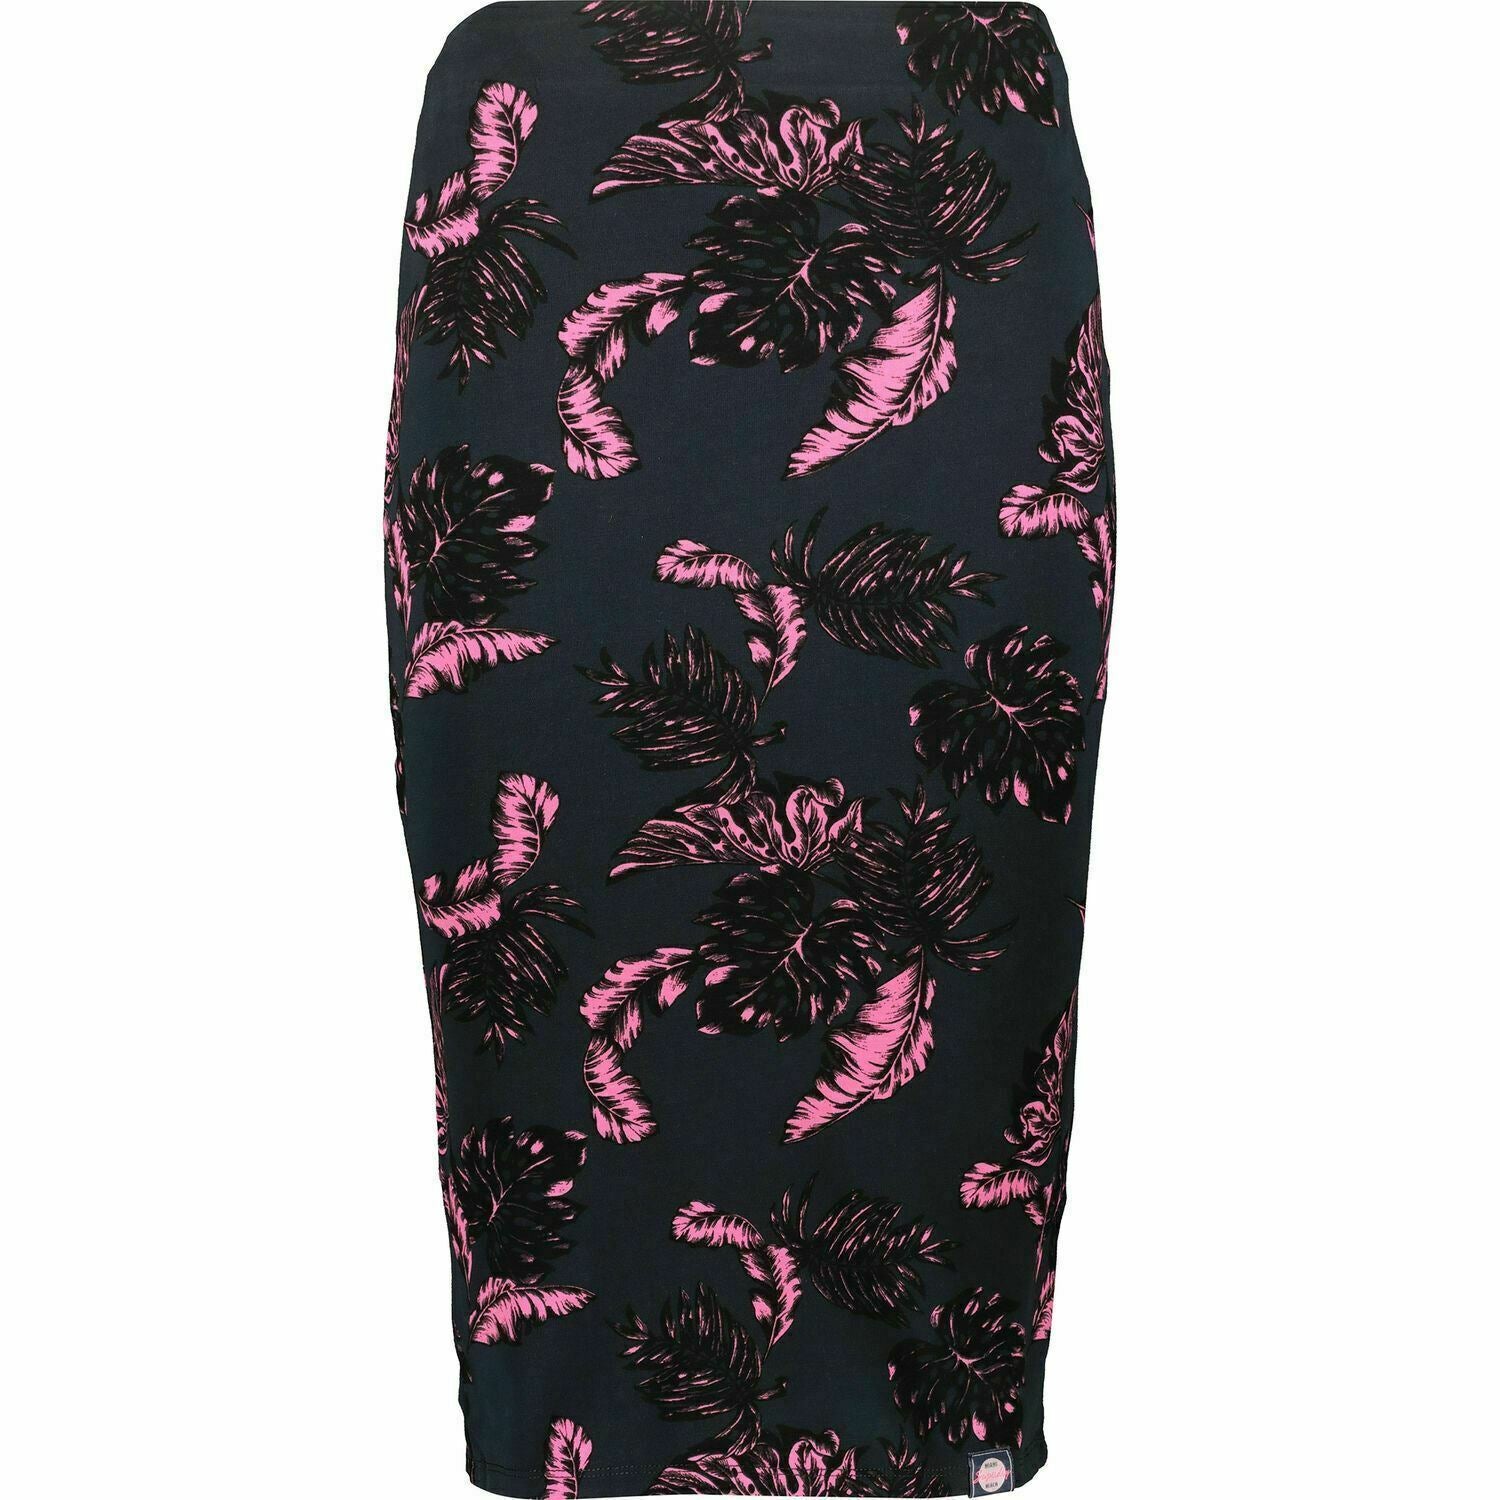 SUPERDRY Women's Beach Leaf Pencil Skirt, Tropical Navy / Pink, size XS - UK 8